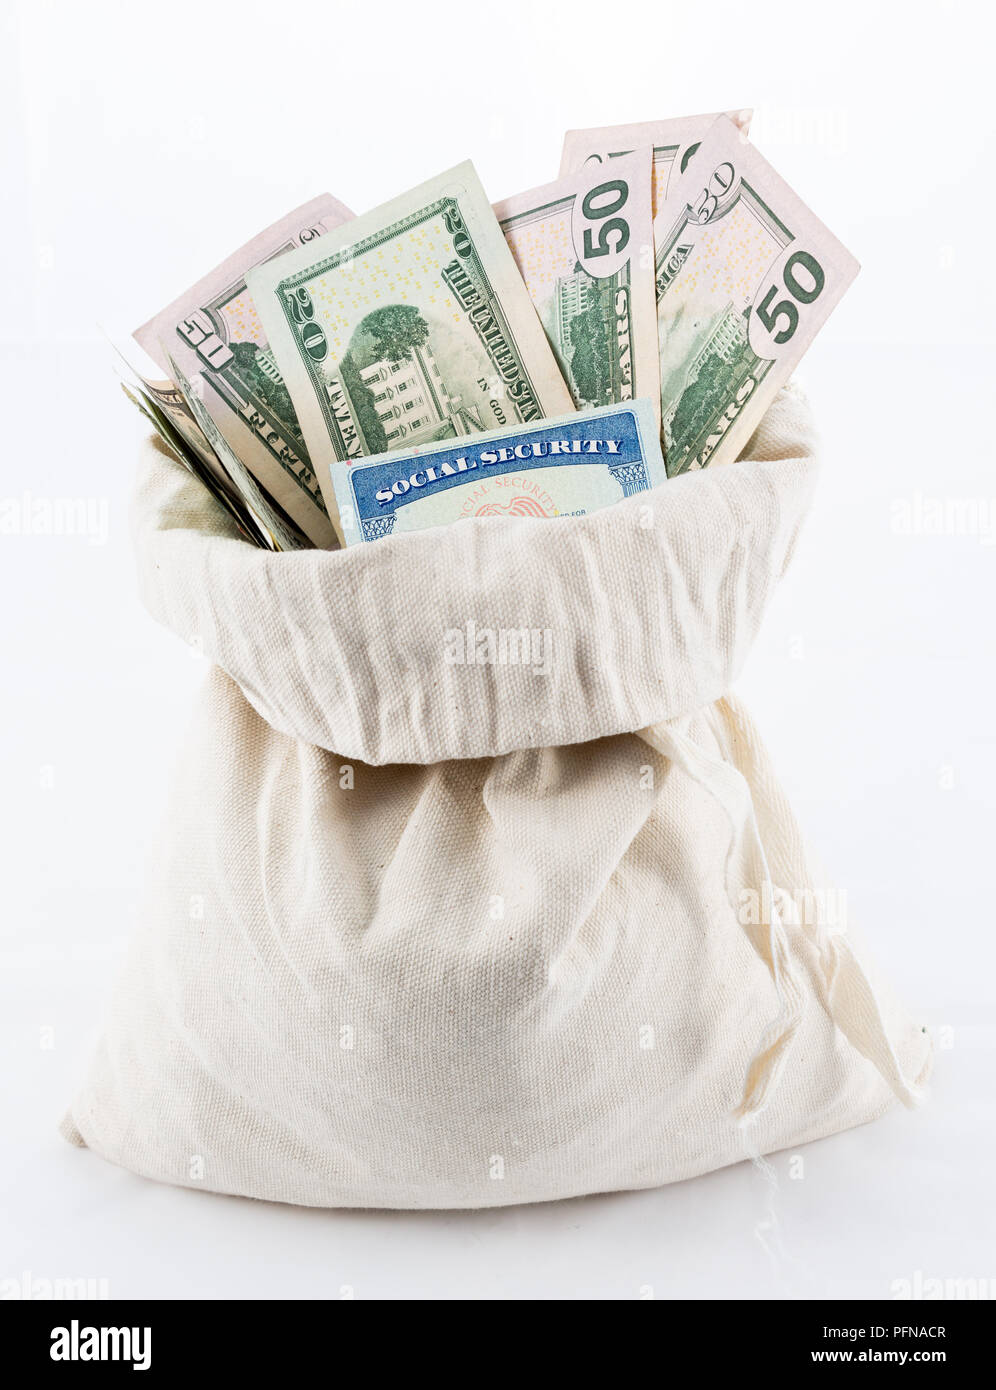 Many US dollar bills or notes in money bag with social security card Stock Photo